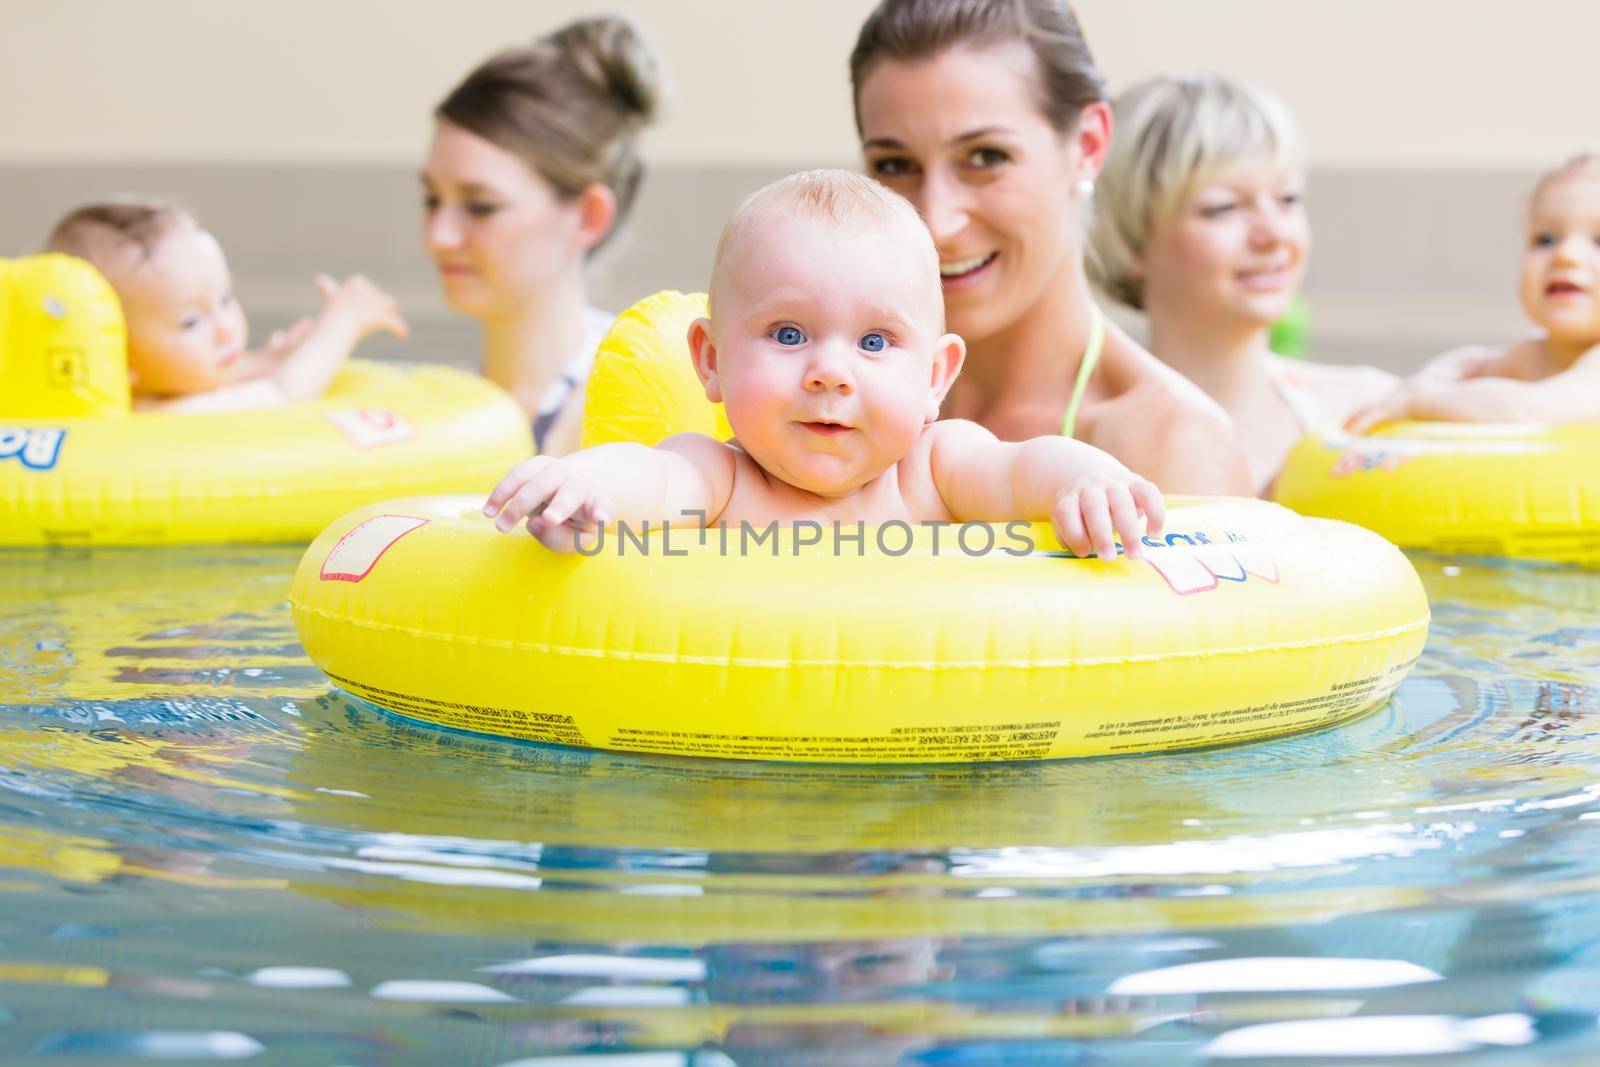 Mums and their children having fun together playing with toys at baby swimming lesson